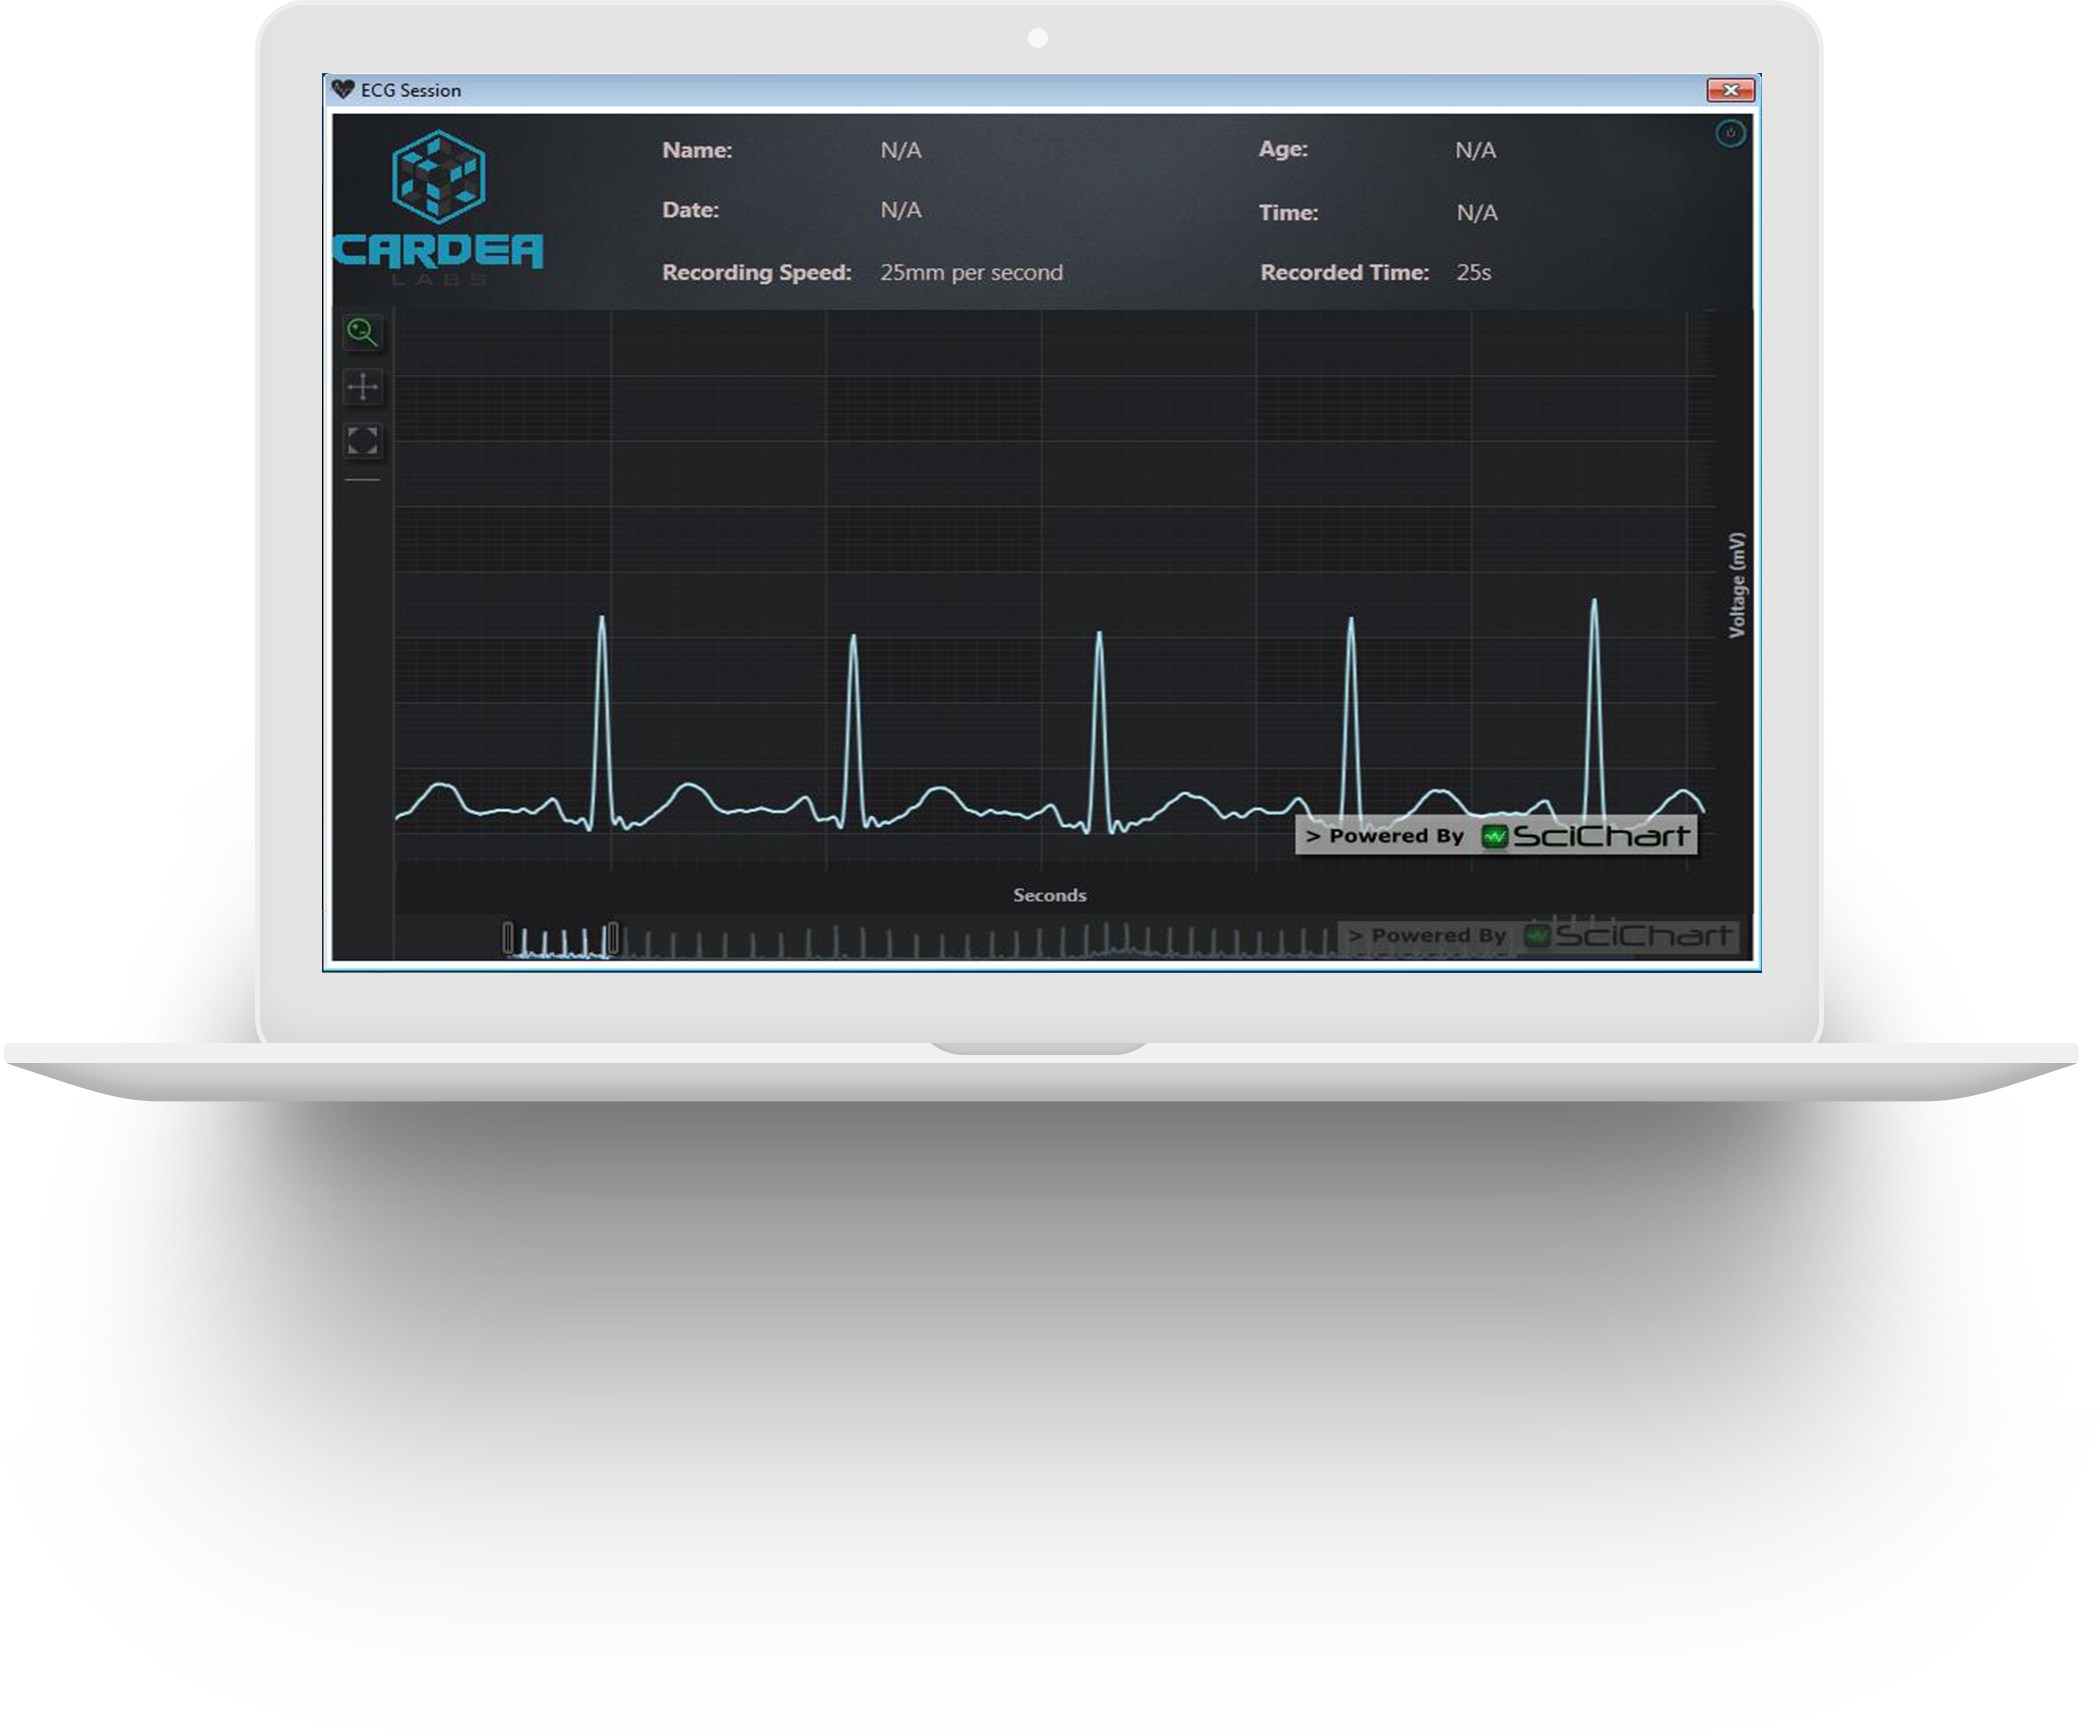 Dynamic WPF Visualization of ECG signals in Realtime